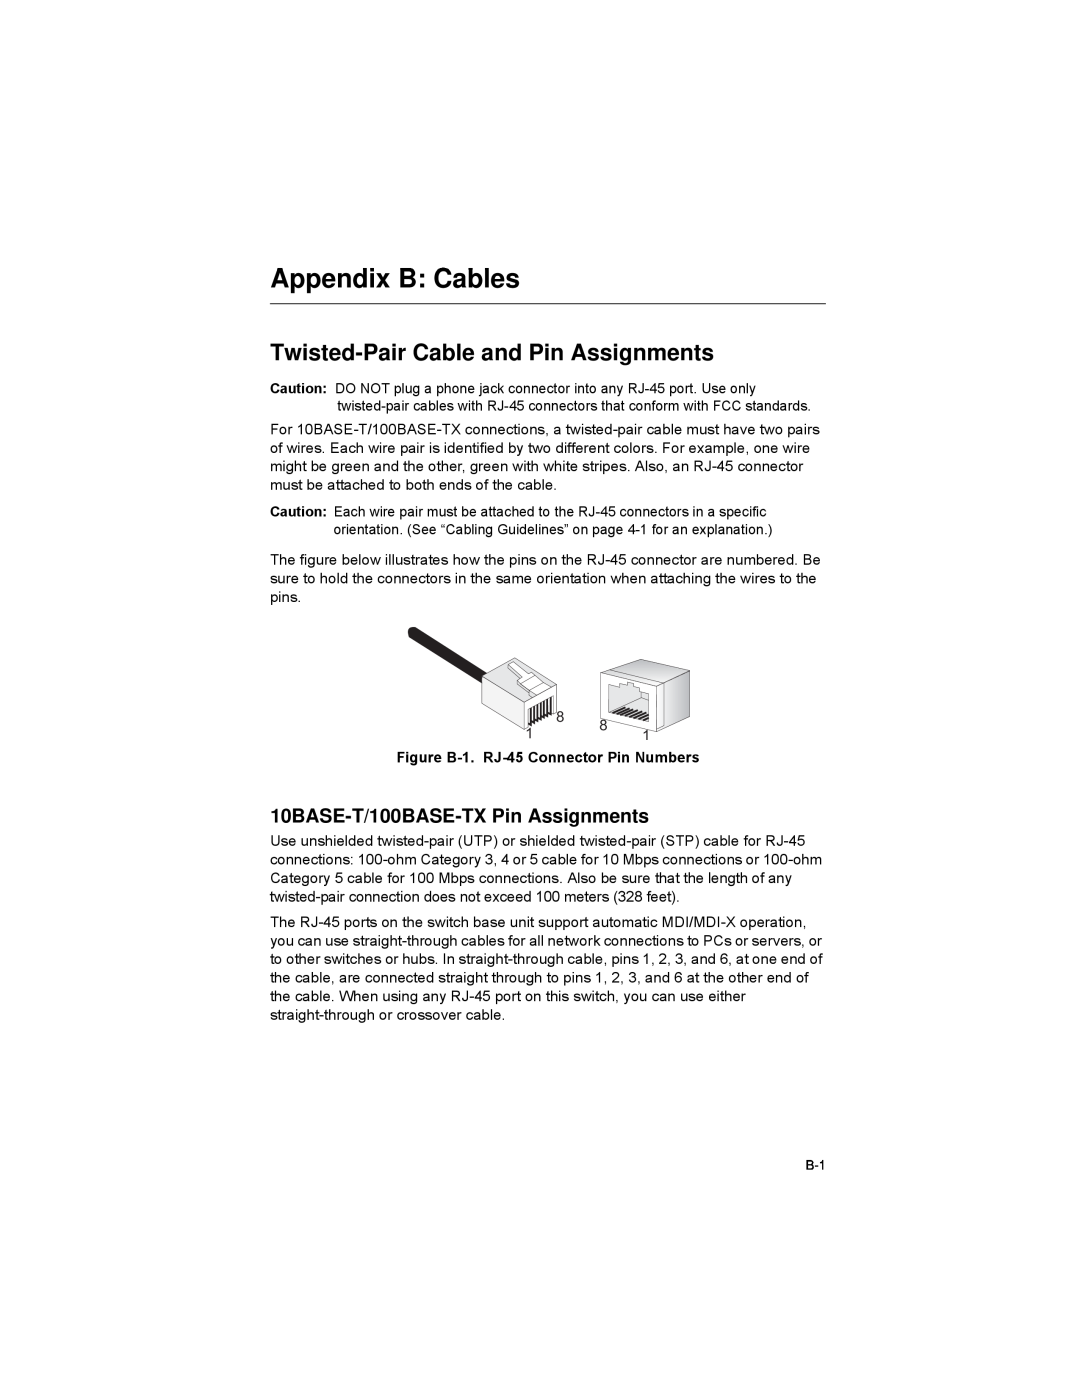 Alcatel-Lucent 6300-24 Appendix B Cables, Twisted-Pair Cable and Pin Assignments, 10BASE-T/100BASE-TX Pin Assignments 